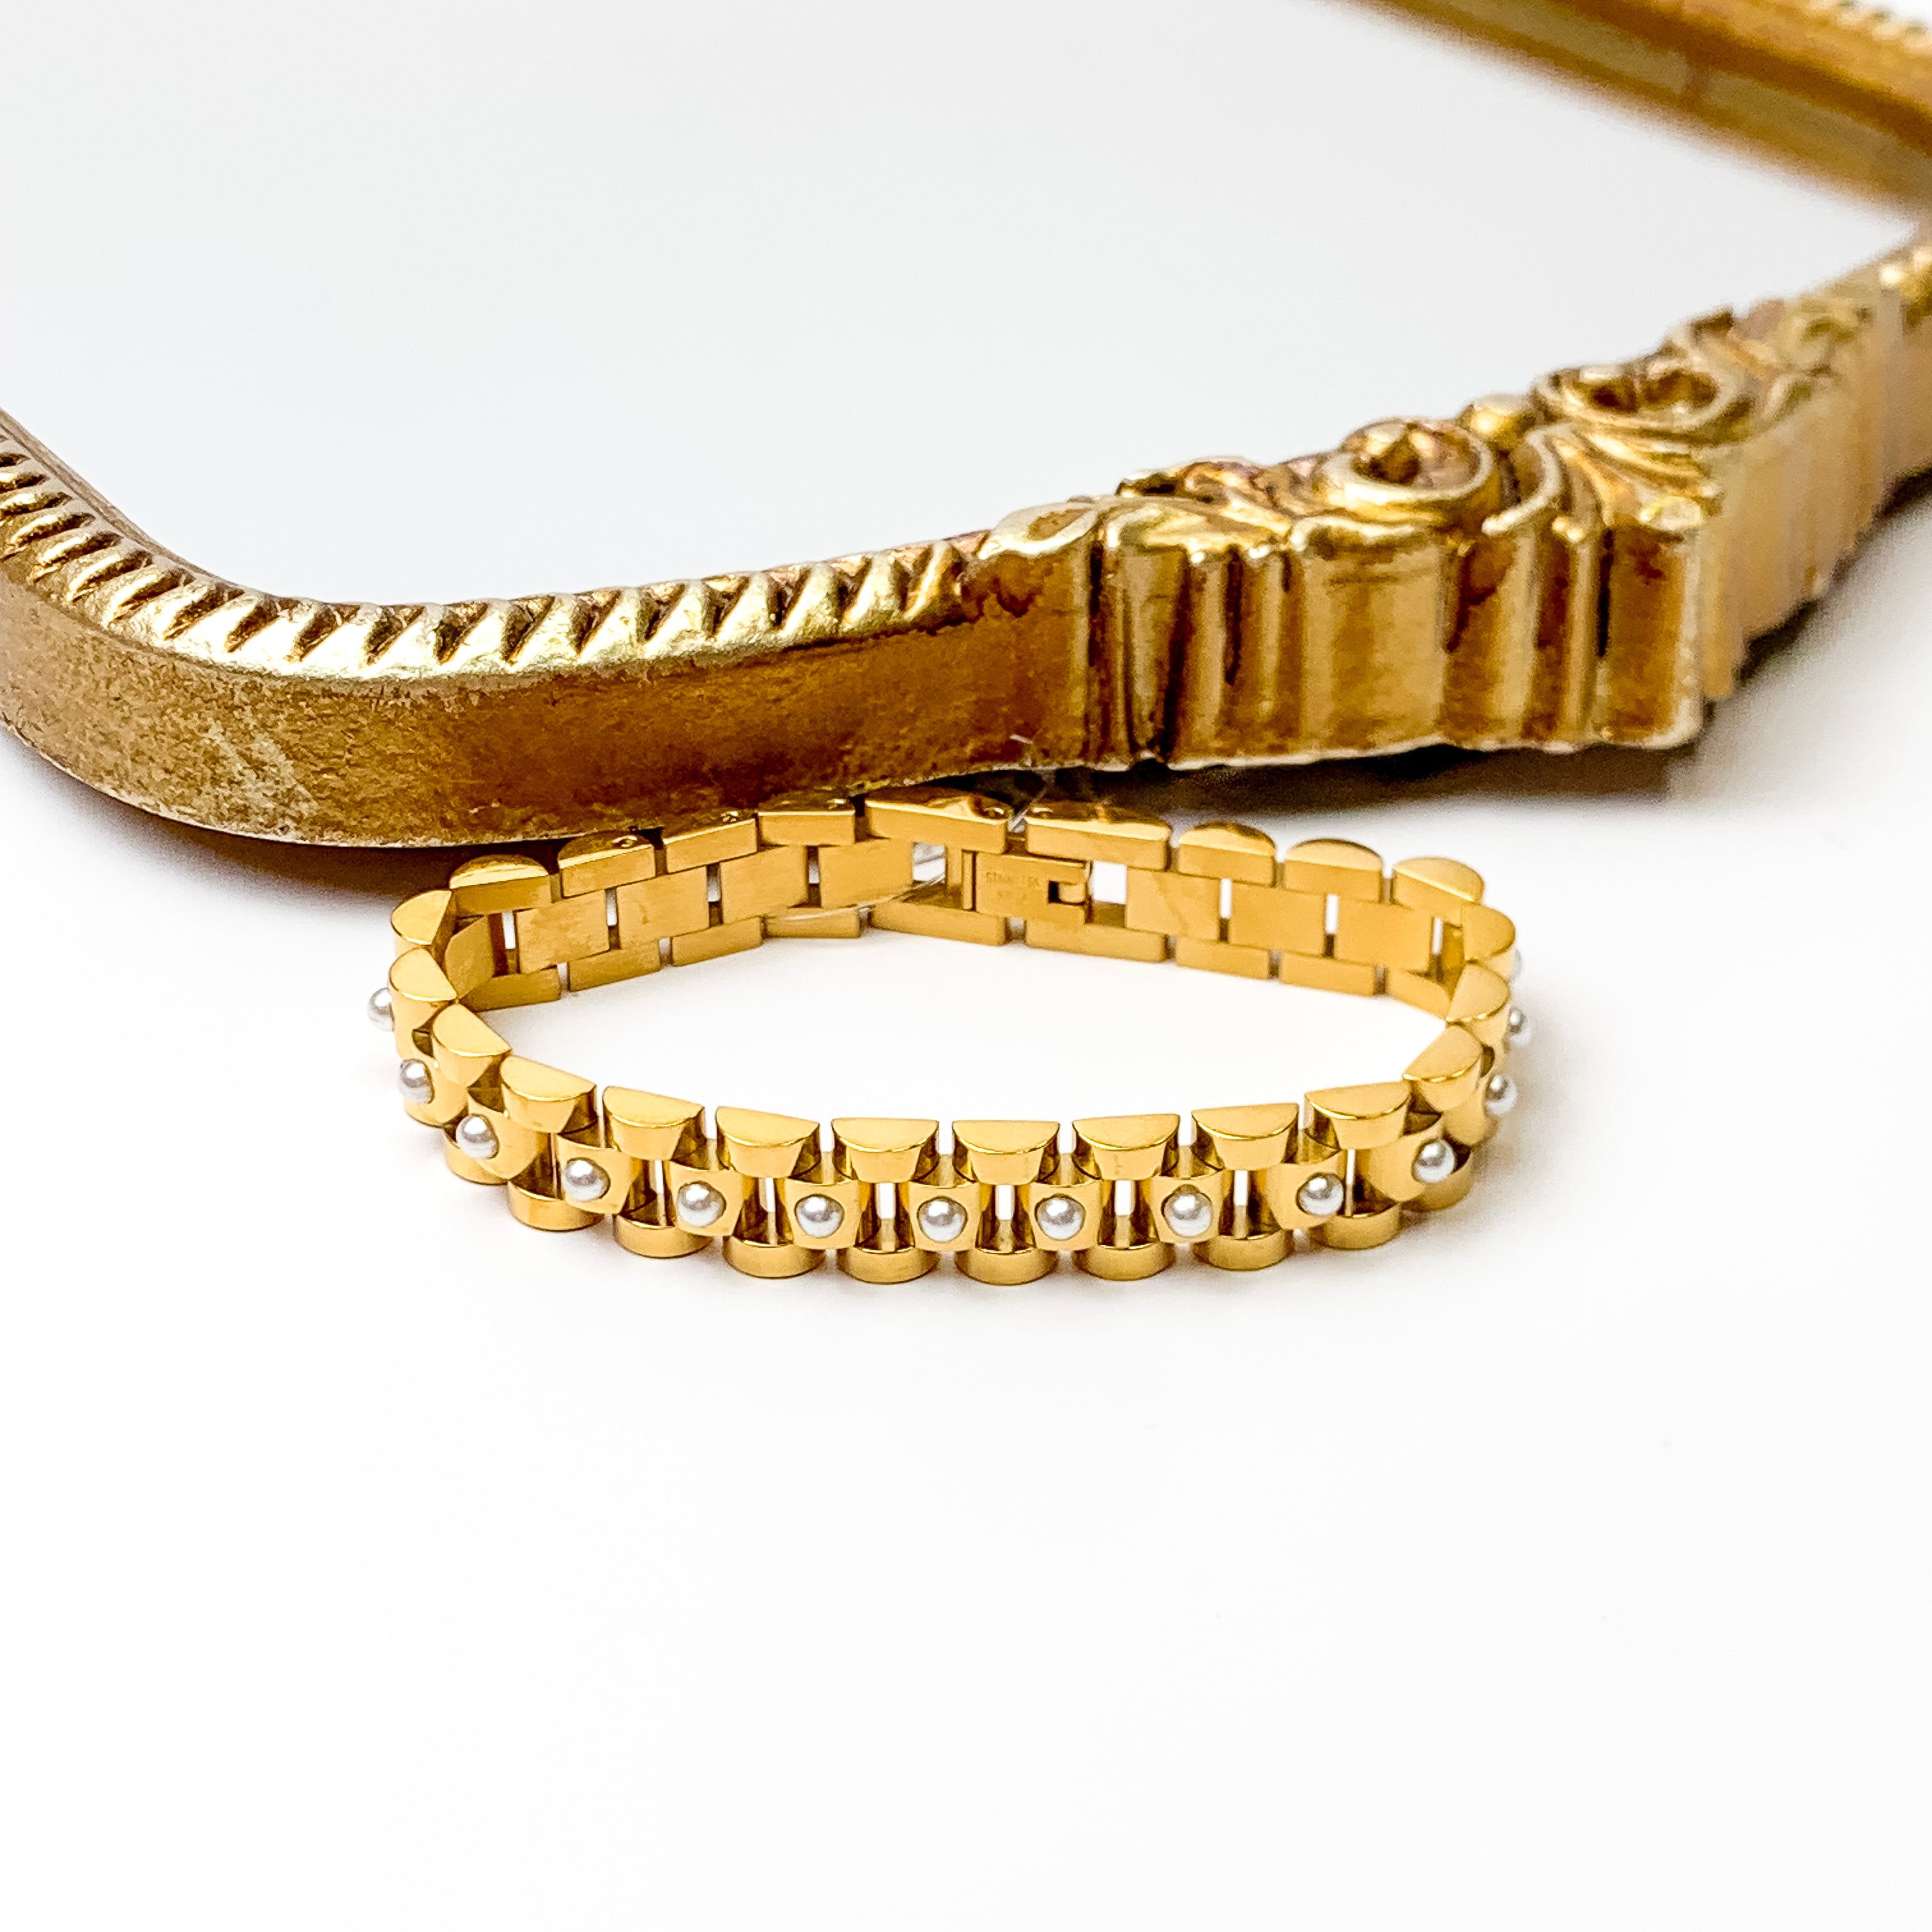 Bracha | Perla Rolly Bracelet in Gold Tone - Giddy Up Glamour Boutique